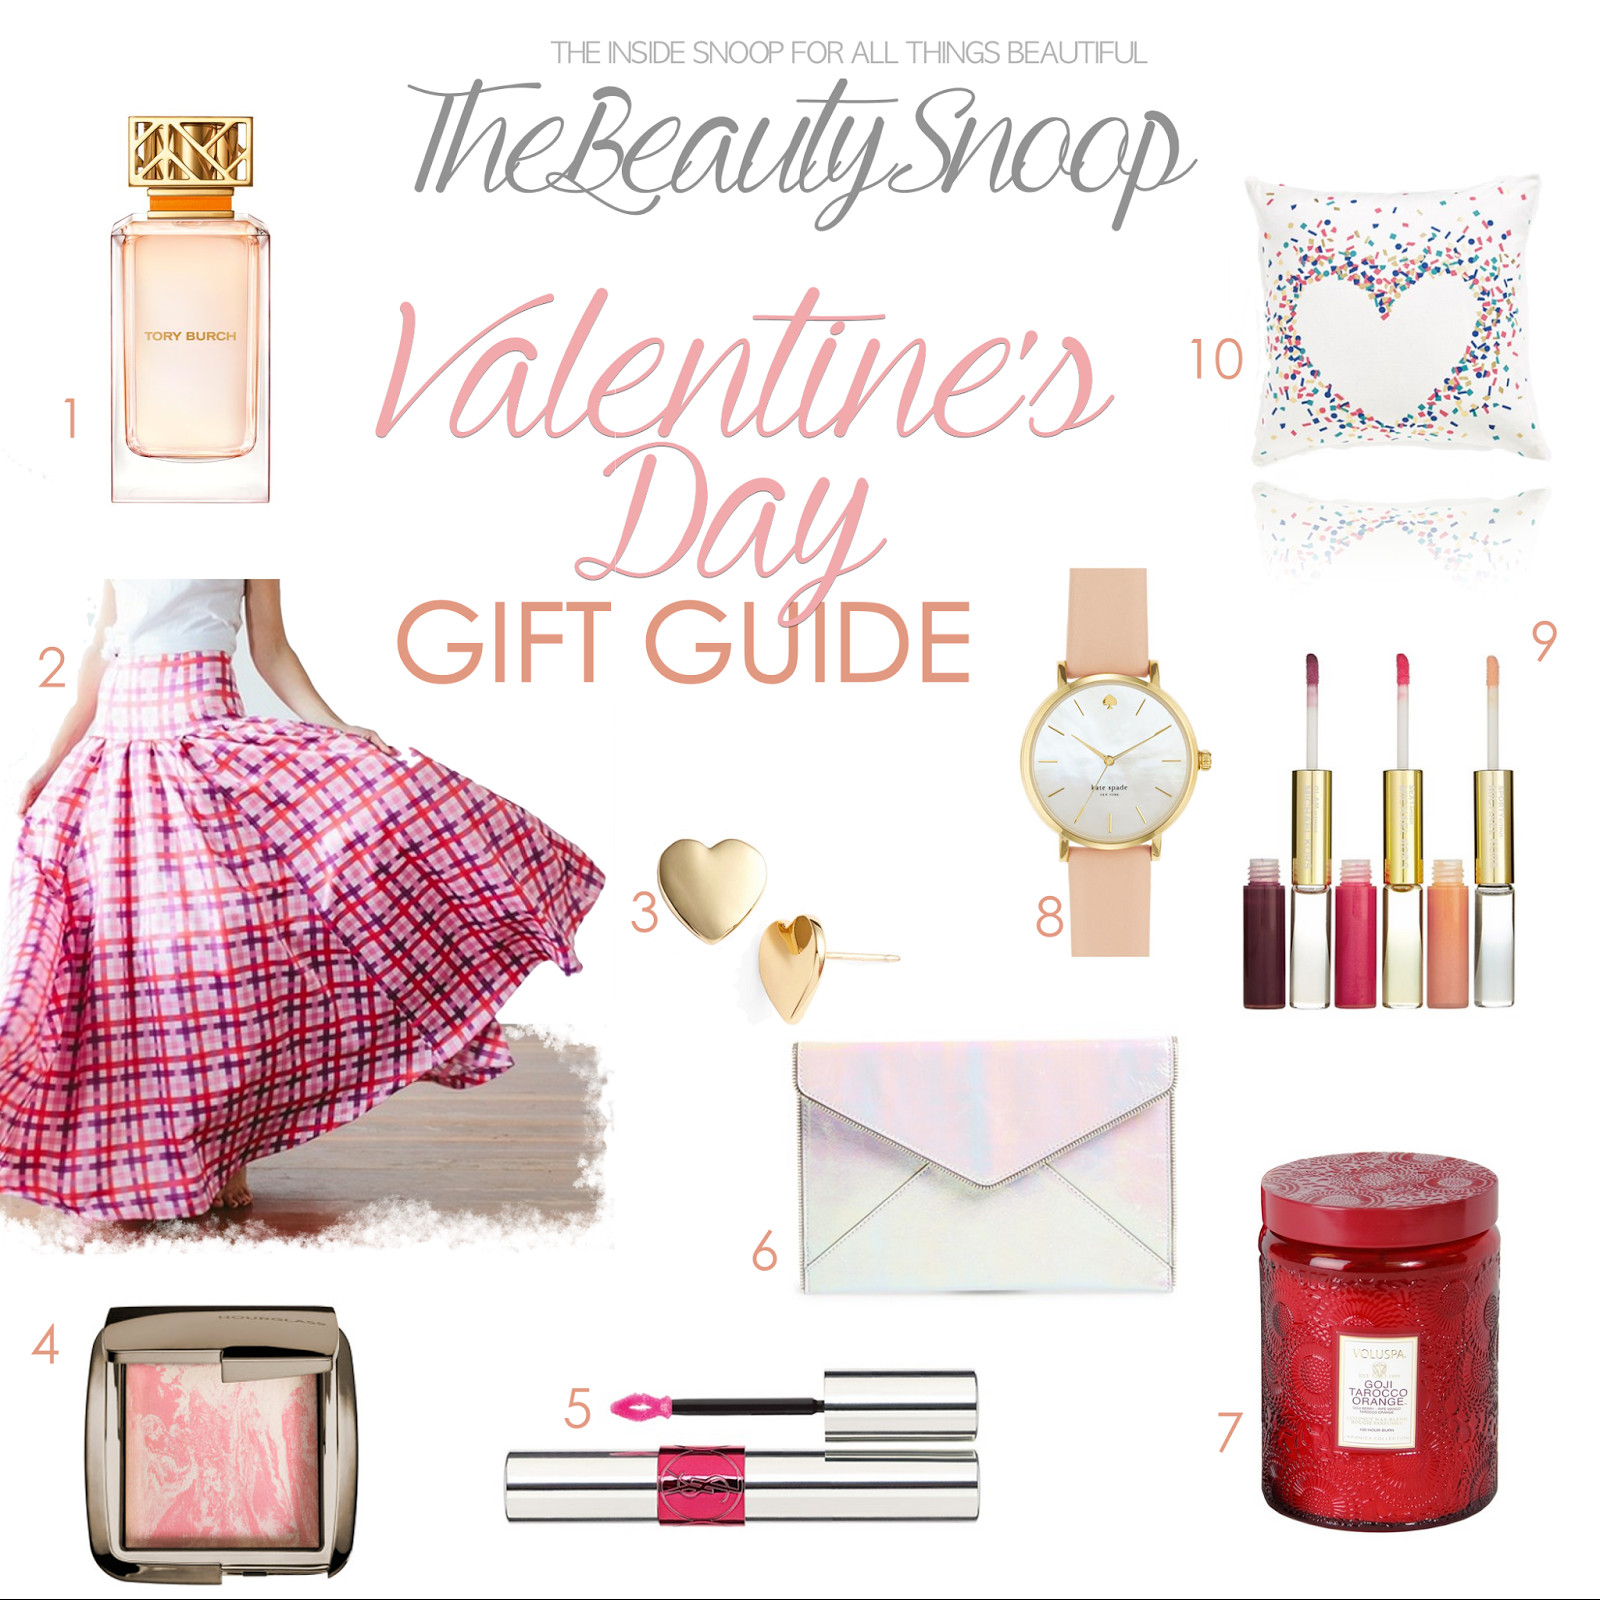 Last Minute Valentine Day Gift Ideas
 THE BEAUTY SNOOP LAST MINUTE VALENTINE S DAY GIFT IDEAS